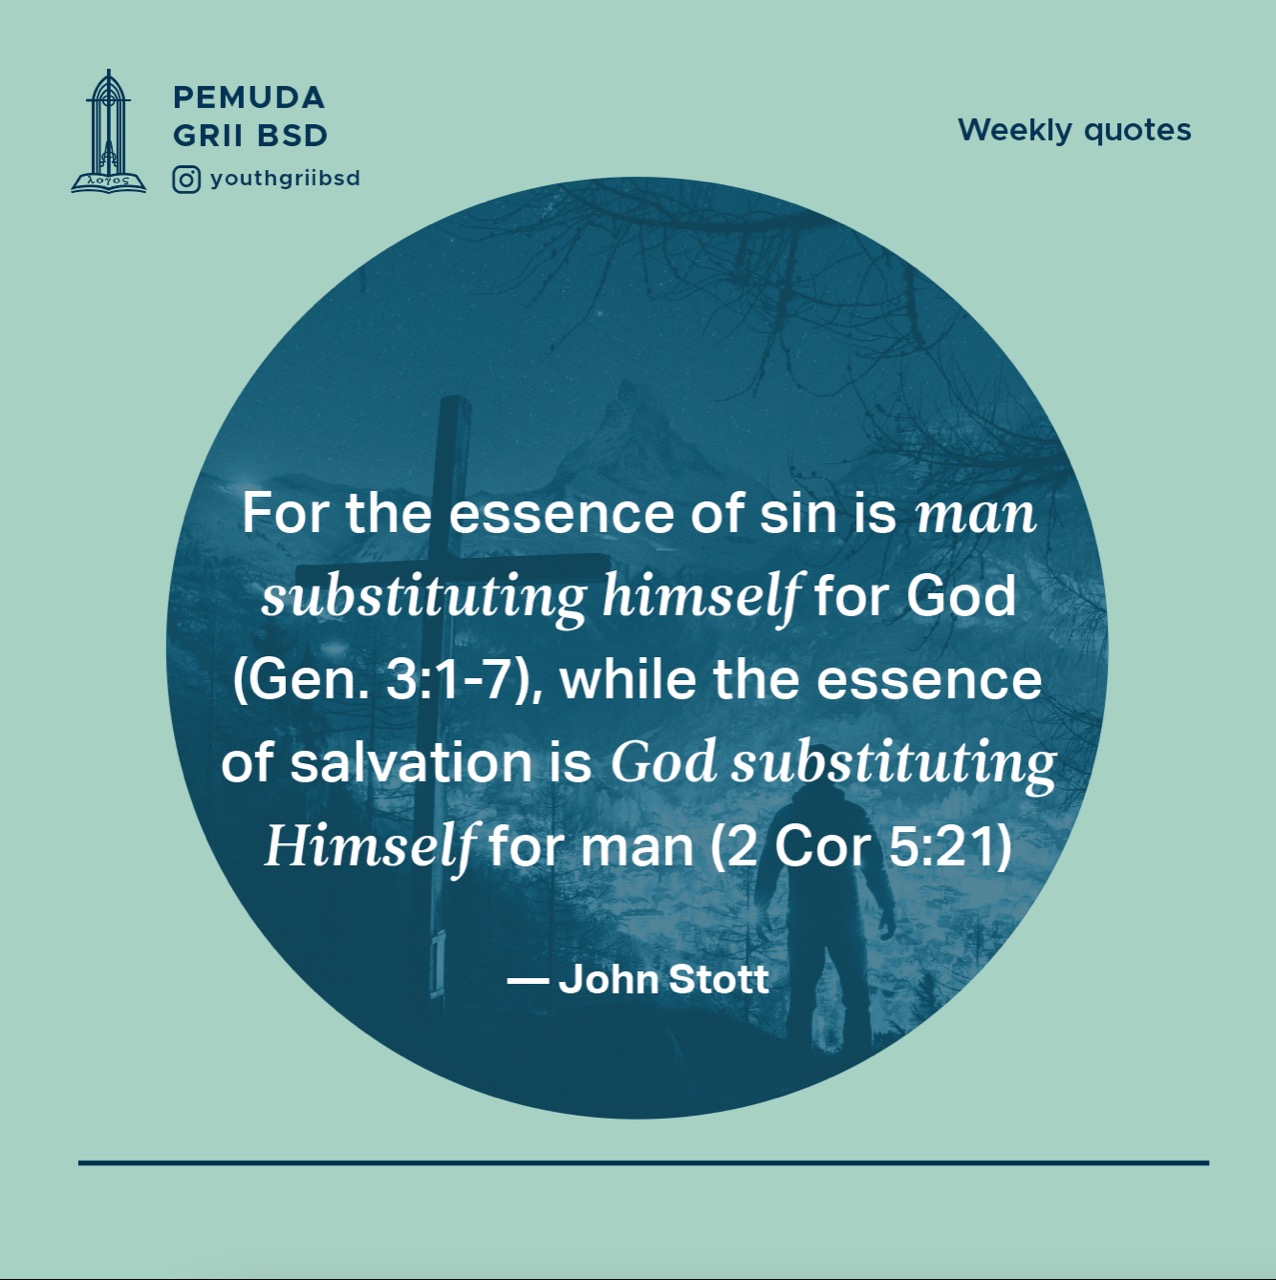 For the essence of sin is man substituting himself for God (Gen. 3:1-7), while the essence of salvation is God substituting Himself for man (2 Cor 5:21)